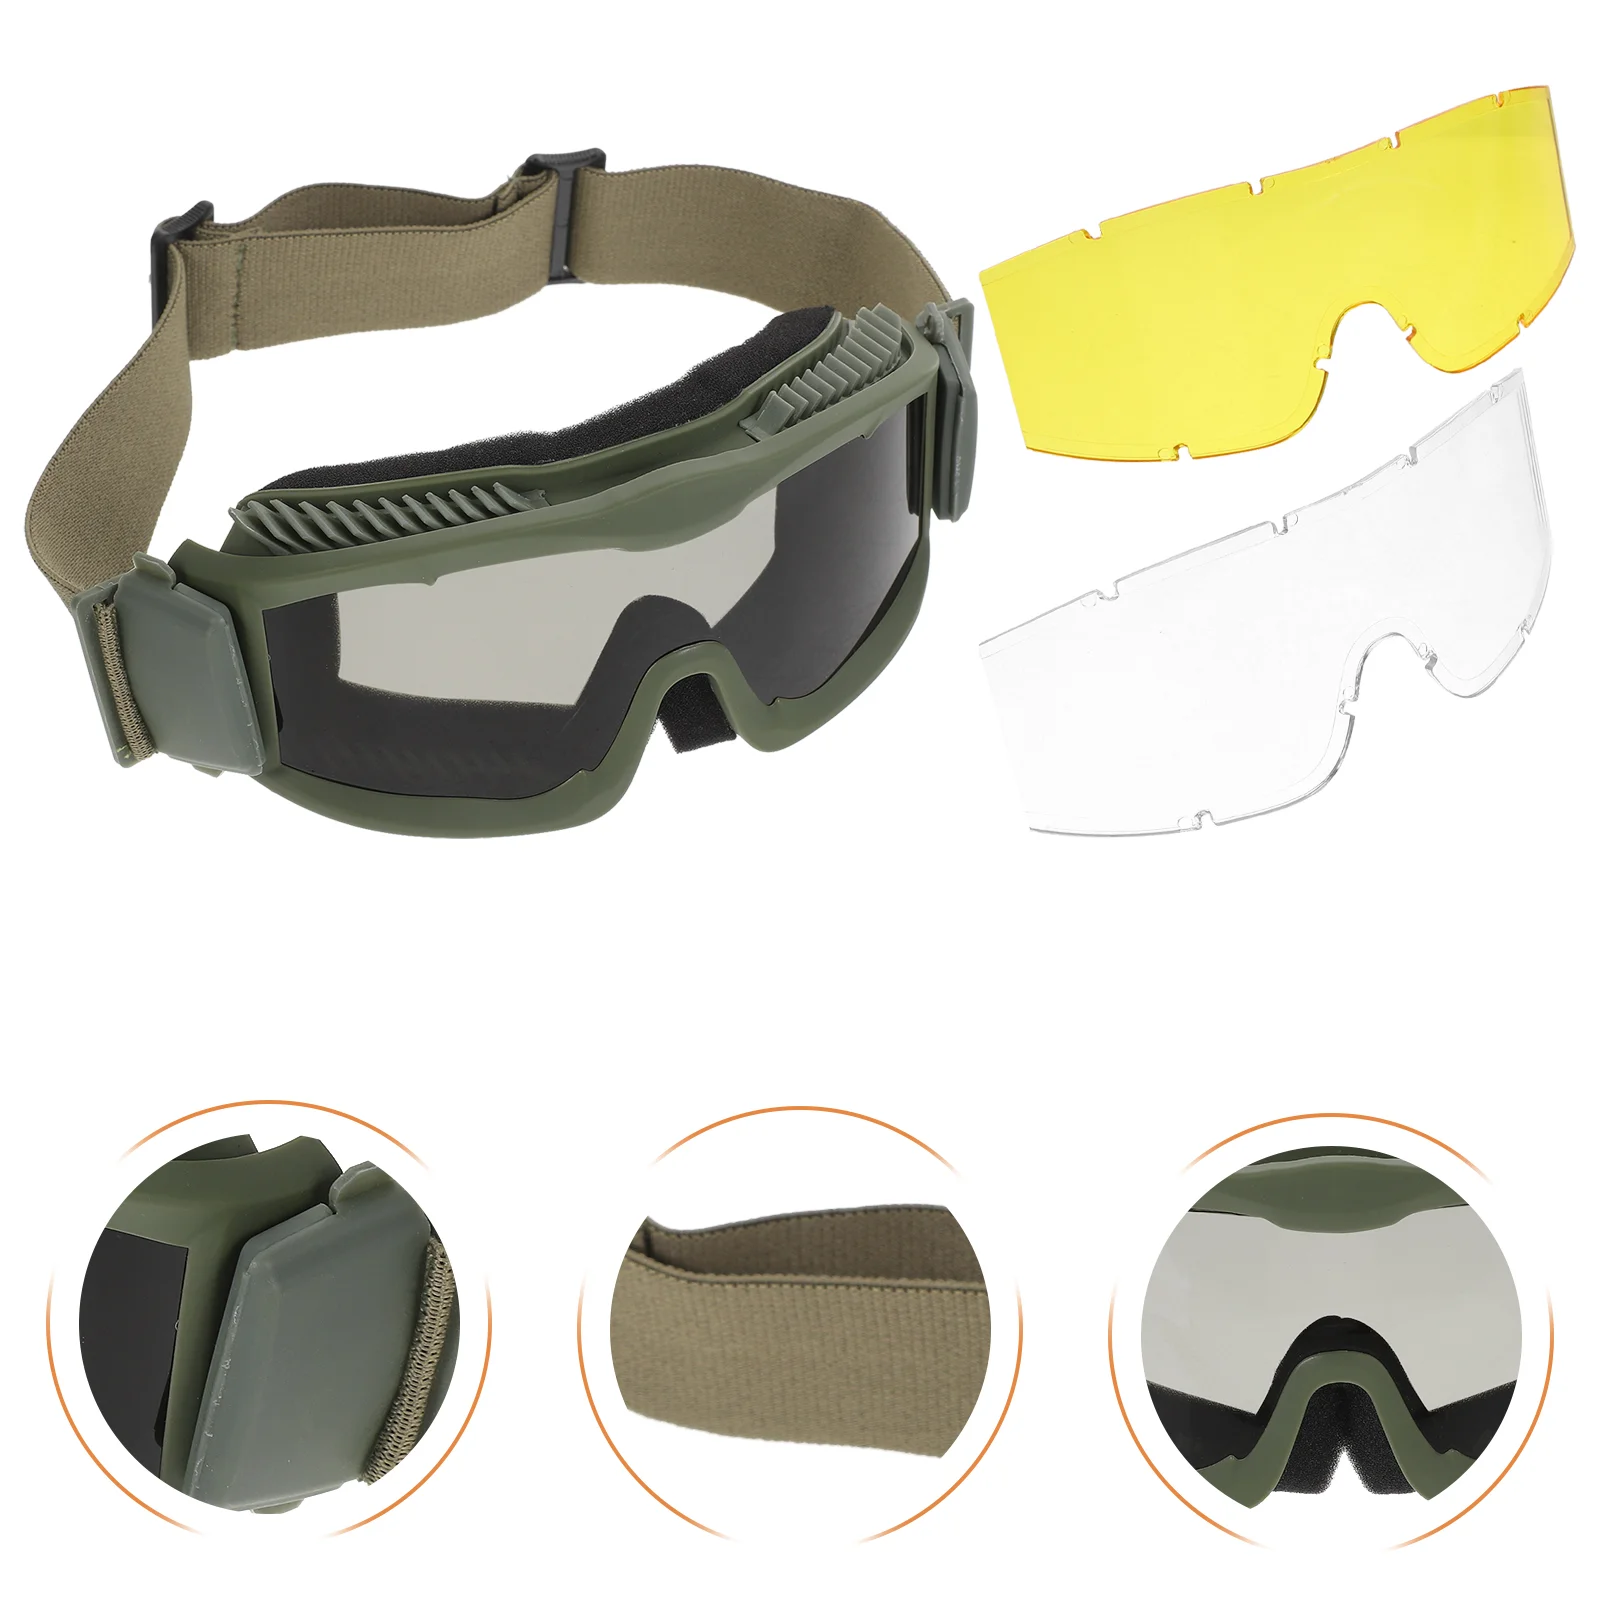 

Glasses Anti-wind and Sand Goggles Outdoor for Portable Tactics Shooting Hunting Windproof Equipment